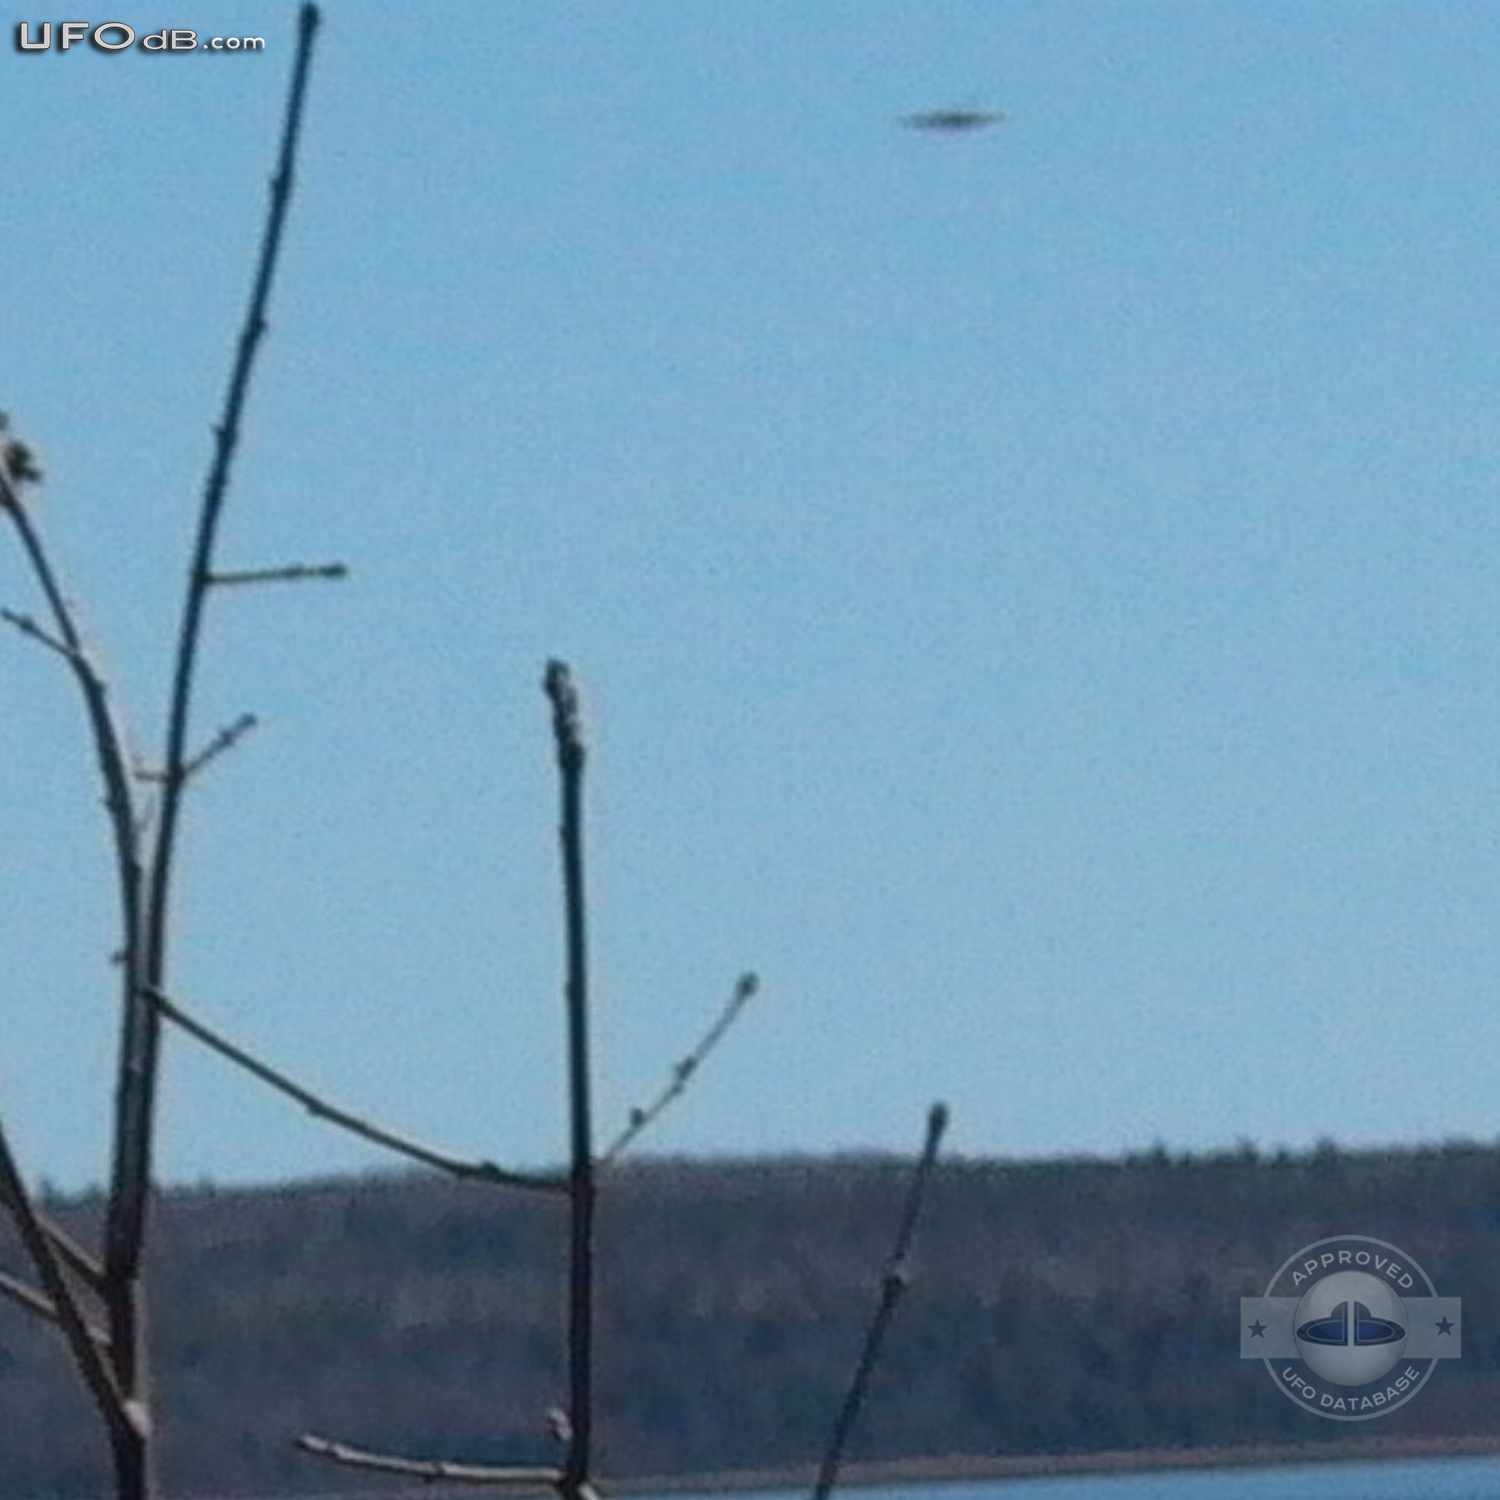 Lake Wosley Fisherman get a fast UFO on picture | Ontario, Canada 2011 UFO Picture #276-2